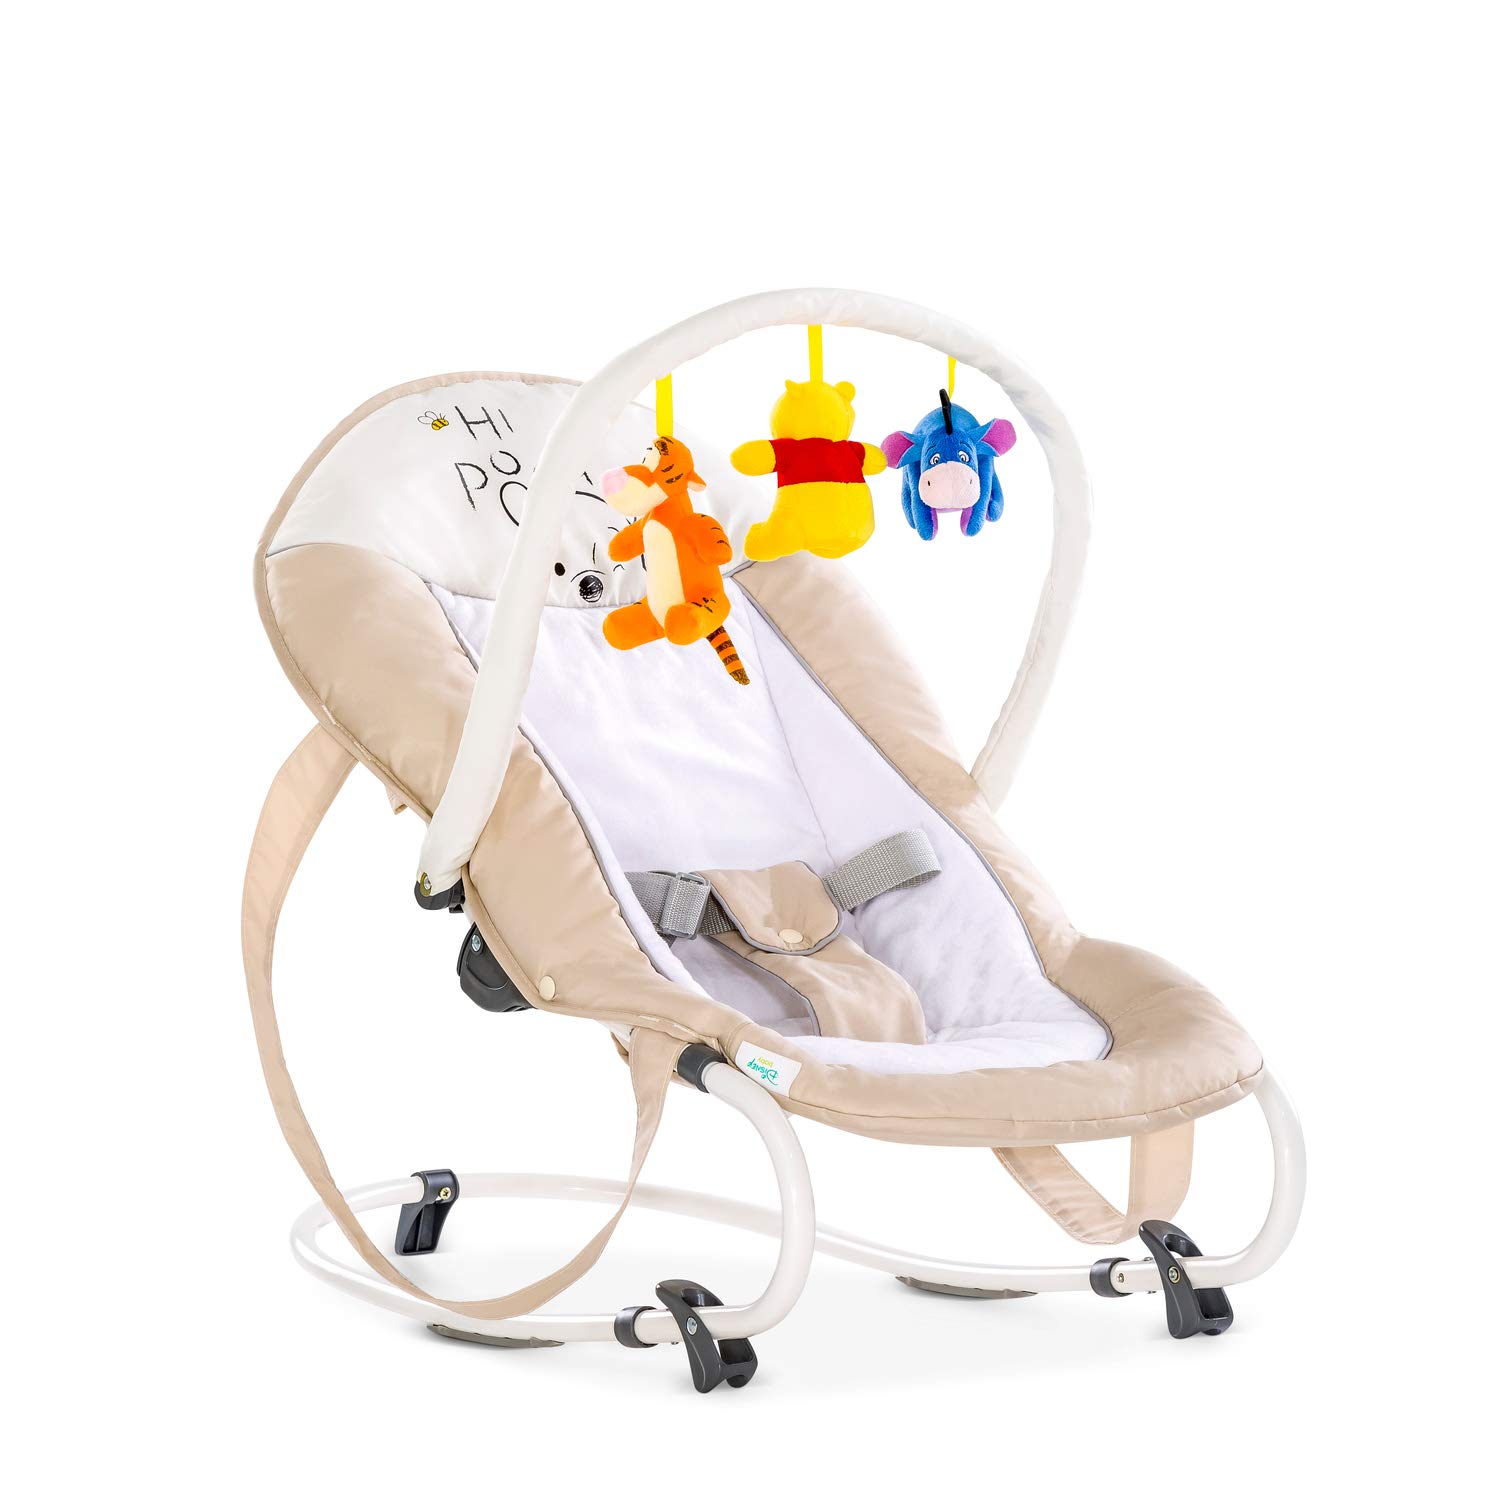 Hauck Bungee Deluxe baby bouncer from birth up to 9 kg with rocking function, play arch, adjustable backrest, safety belt, handles, tip-proof, portable - Pooh beige